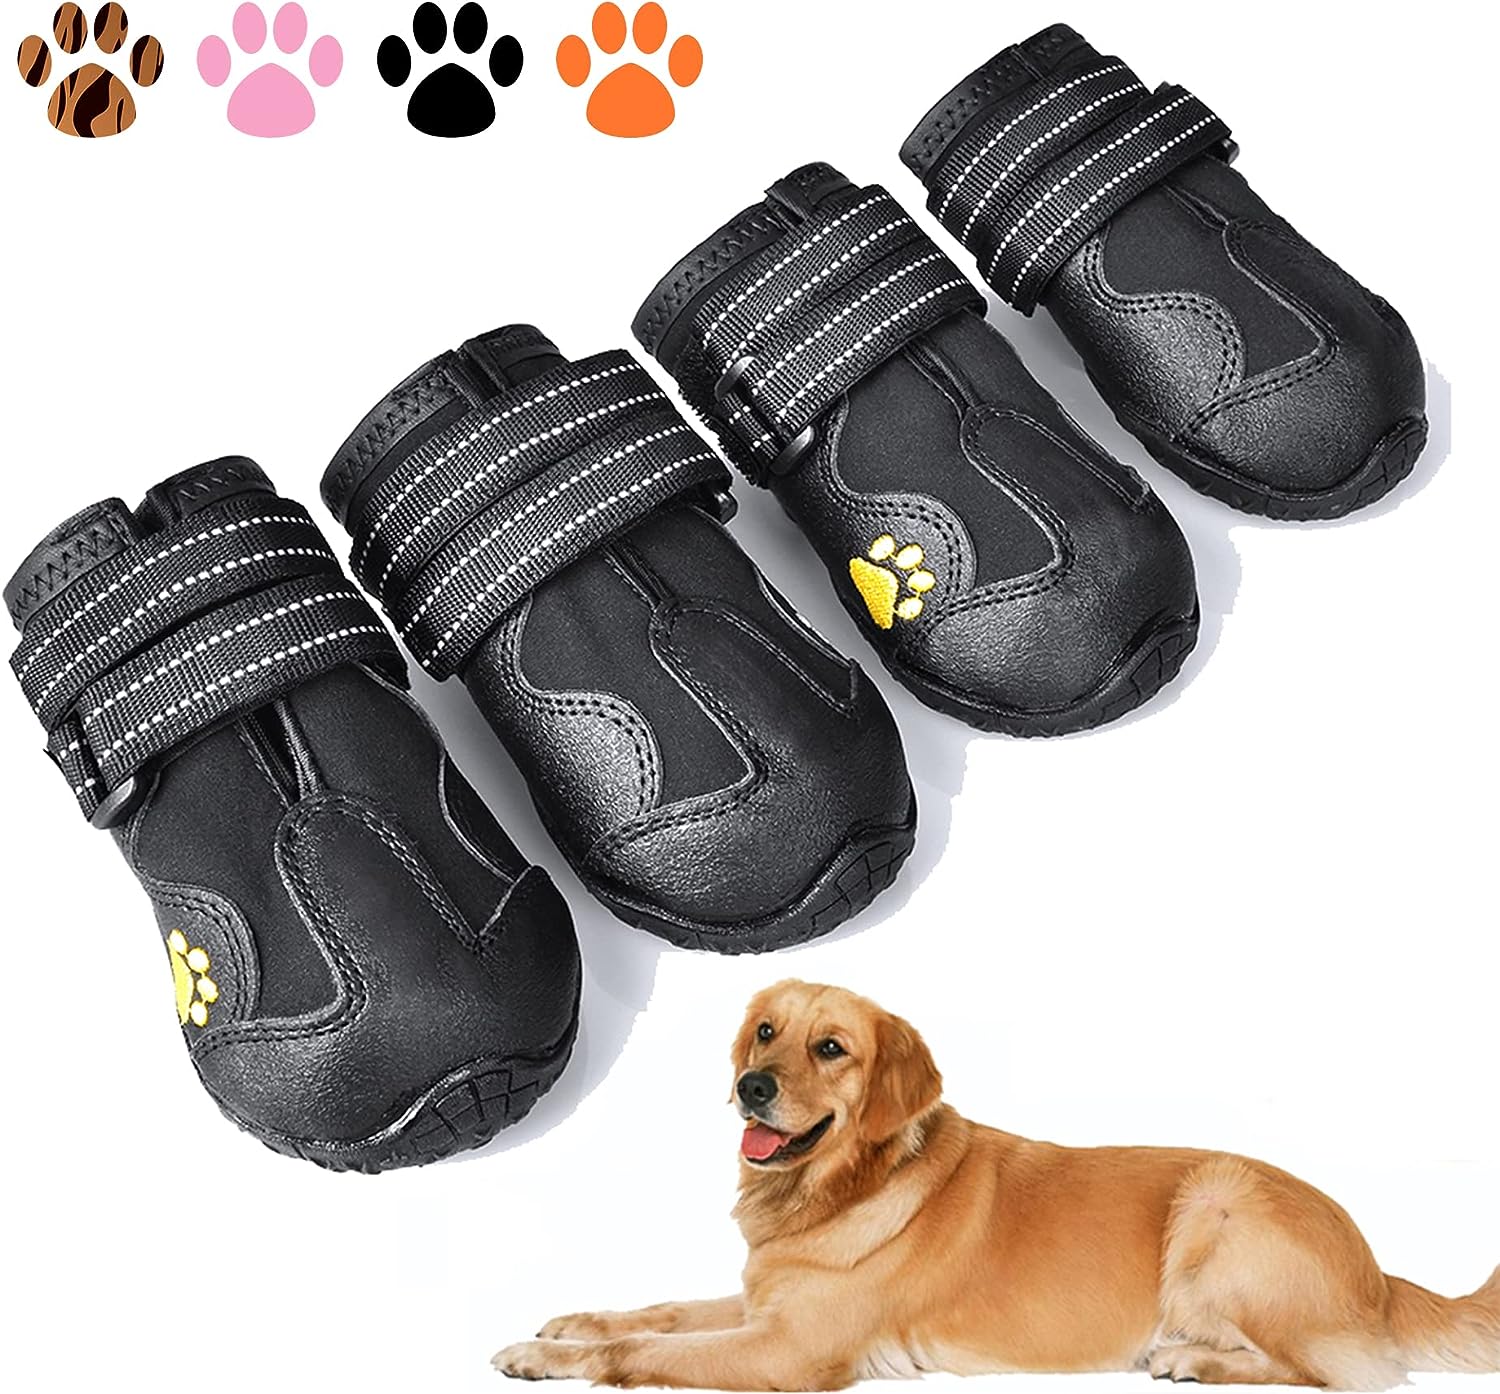 XSY&G Dog Boots,Waterproof Dog Shoes,Dog Booties with [...]